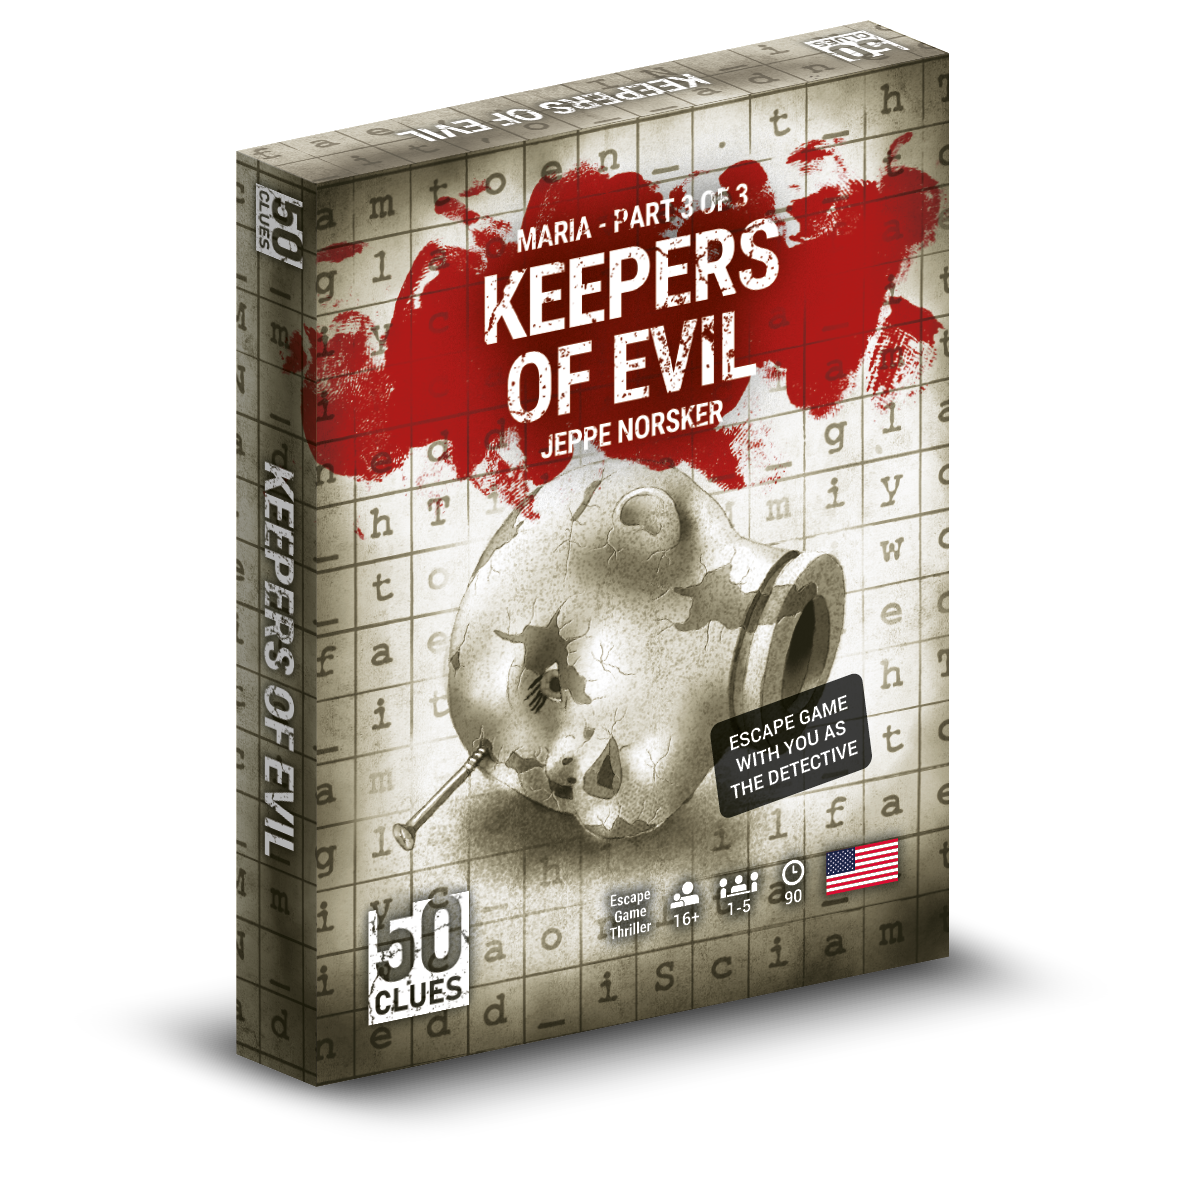 50 Clues: Maria part 3 - Keepers of Evil